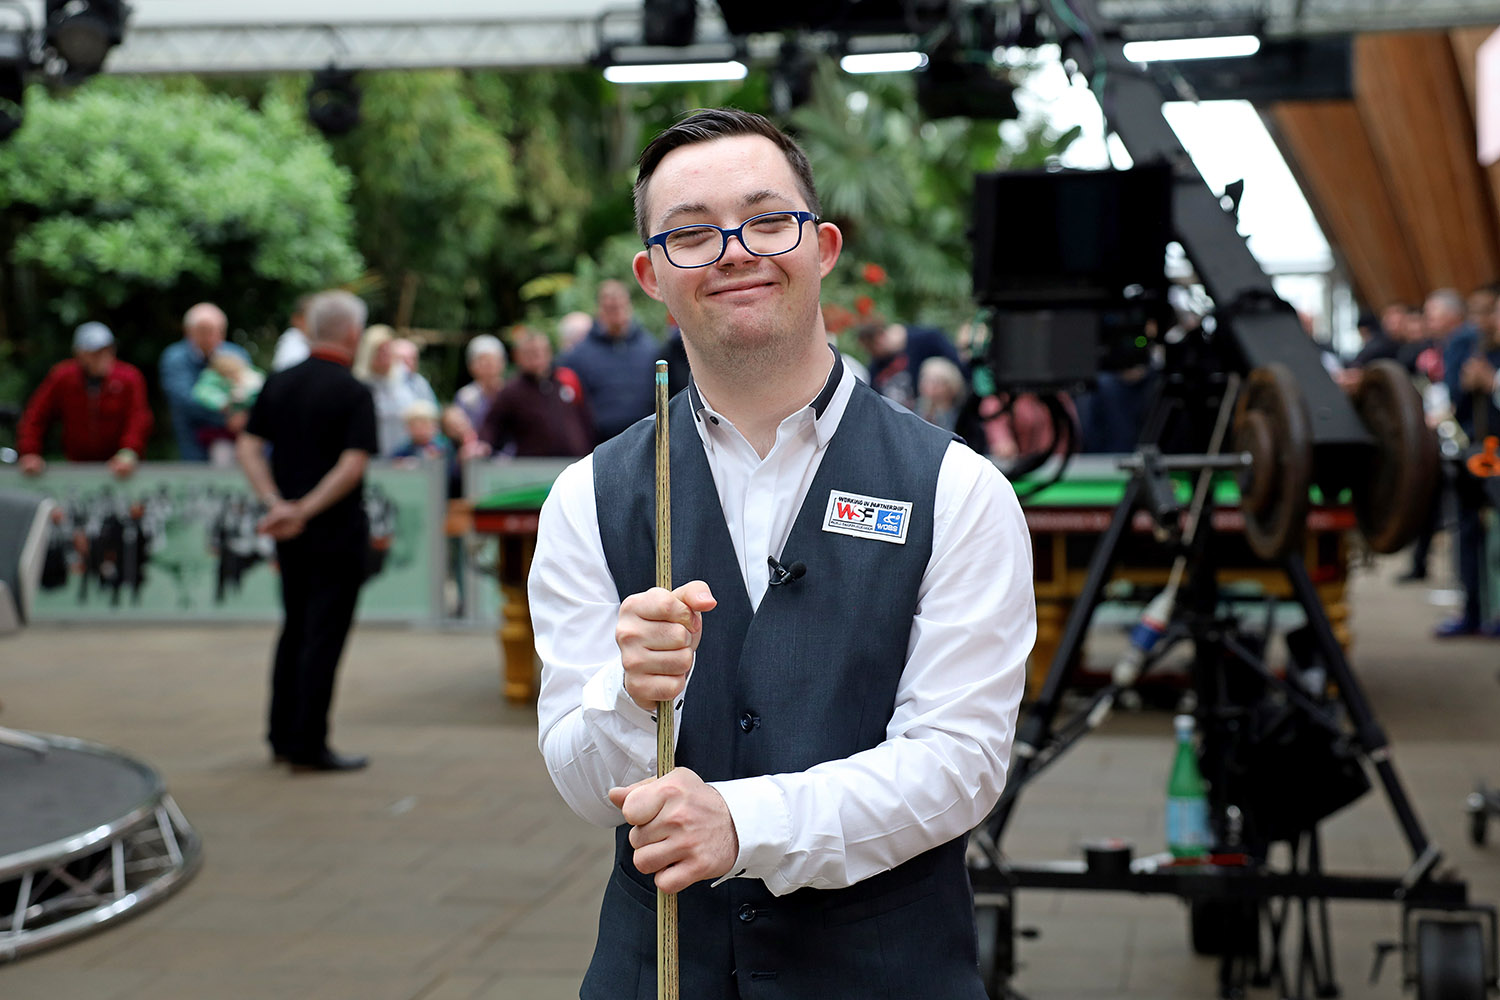 Dylan Smith stood smiling with snooker cue